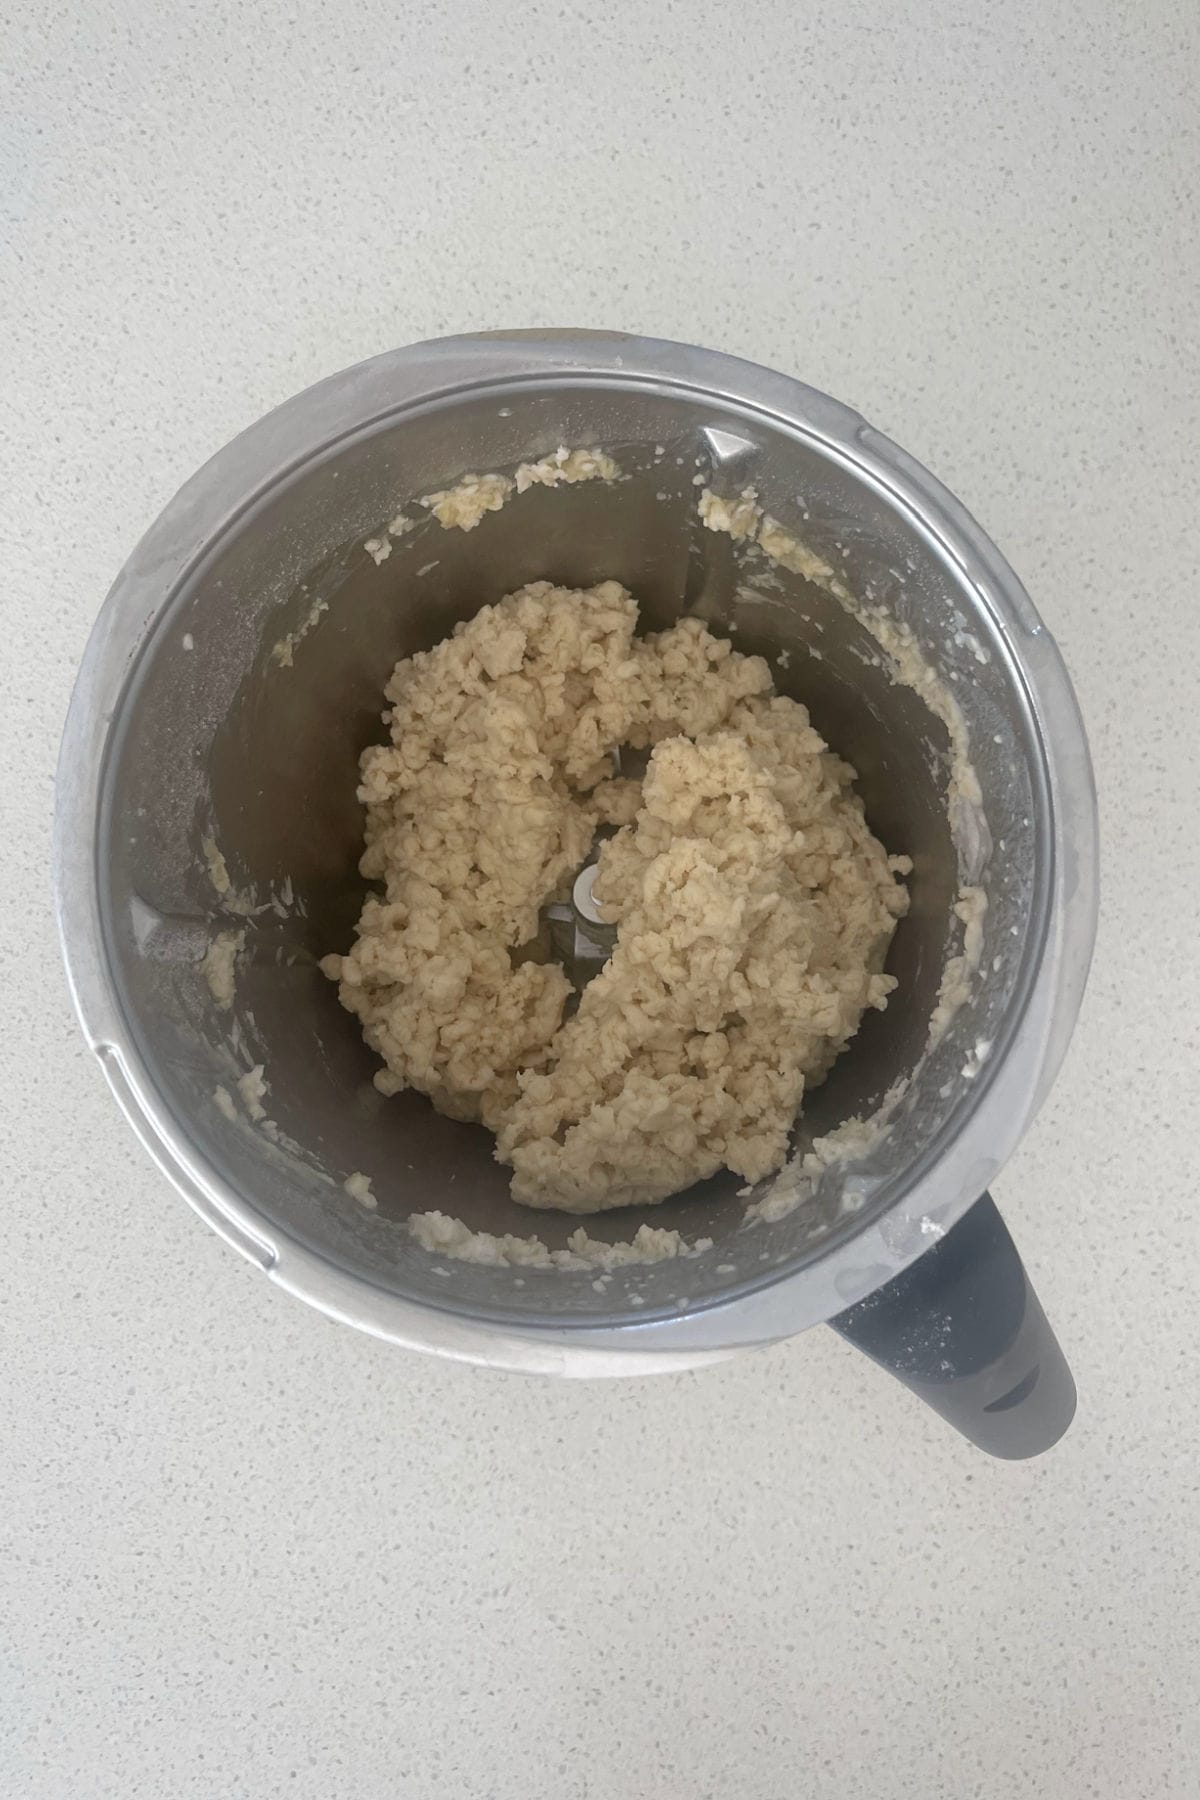 Combined tortilla ingredients in a Thermomix bowl.